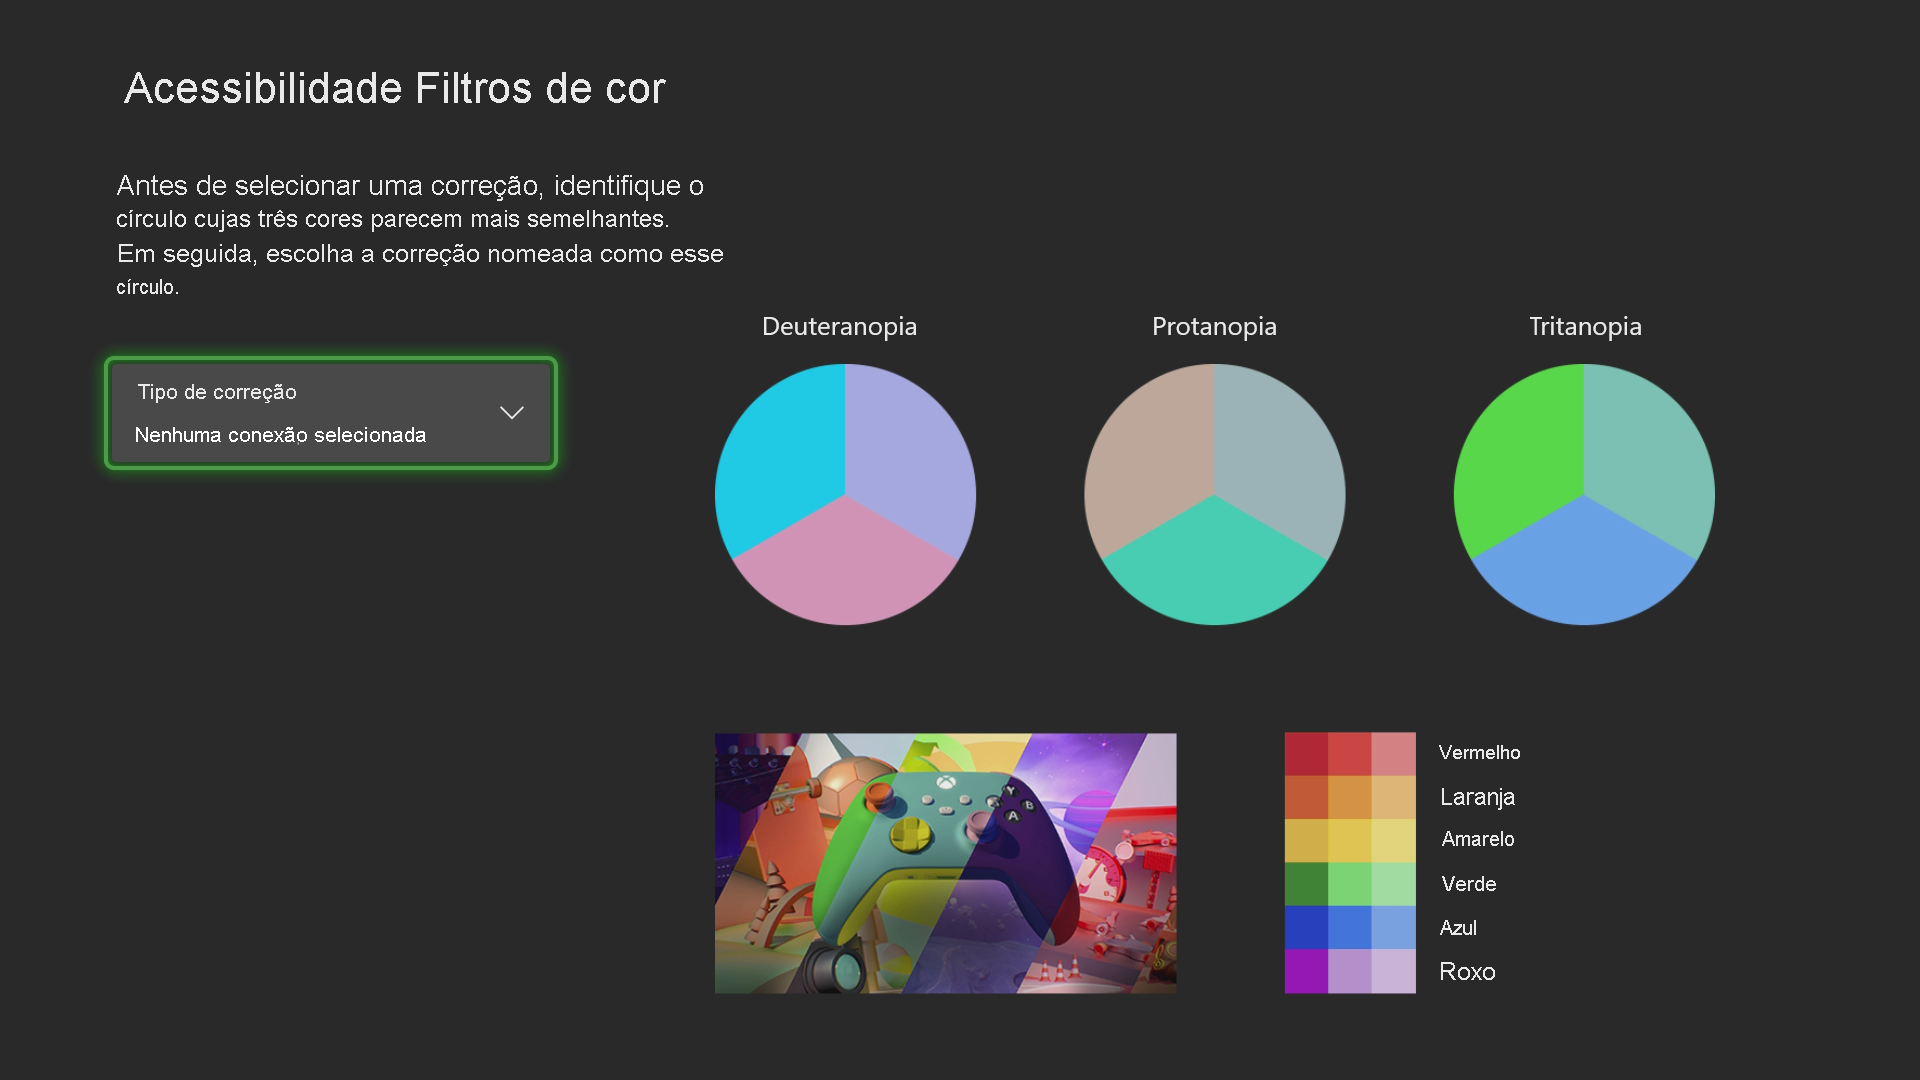 A screenshot that shows the Xbox Accessibility Color filters settings screen. The list box Correction type: No correction selected is shown and highlighted. To the right are three circles, each divided into three equal segments of different colors and labeled Deuteranopia, Protanopia, and Tritanopia. Underneath the circles is a colorful image of an Xbox controller. Next to it is a grid of colors representing the colors of the rainbow, from red to purple. Text on the screen reads: Before selecting a correction, identify the circle whose three colors look most similar. Then choose the correction named for that circle.